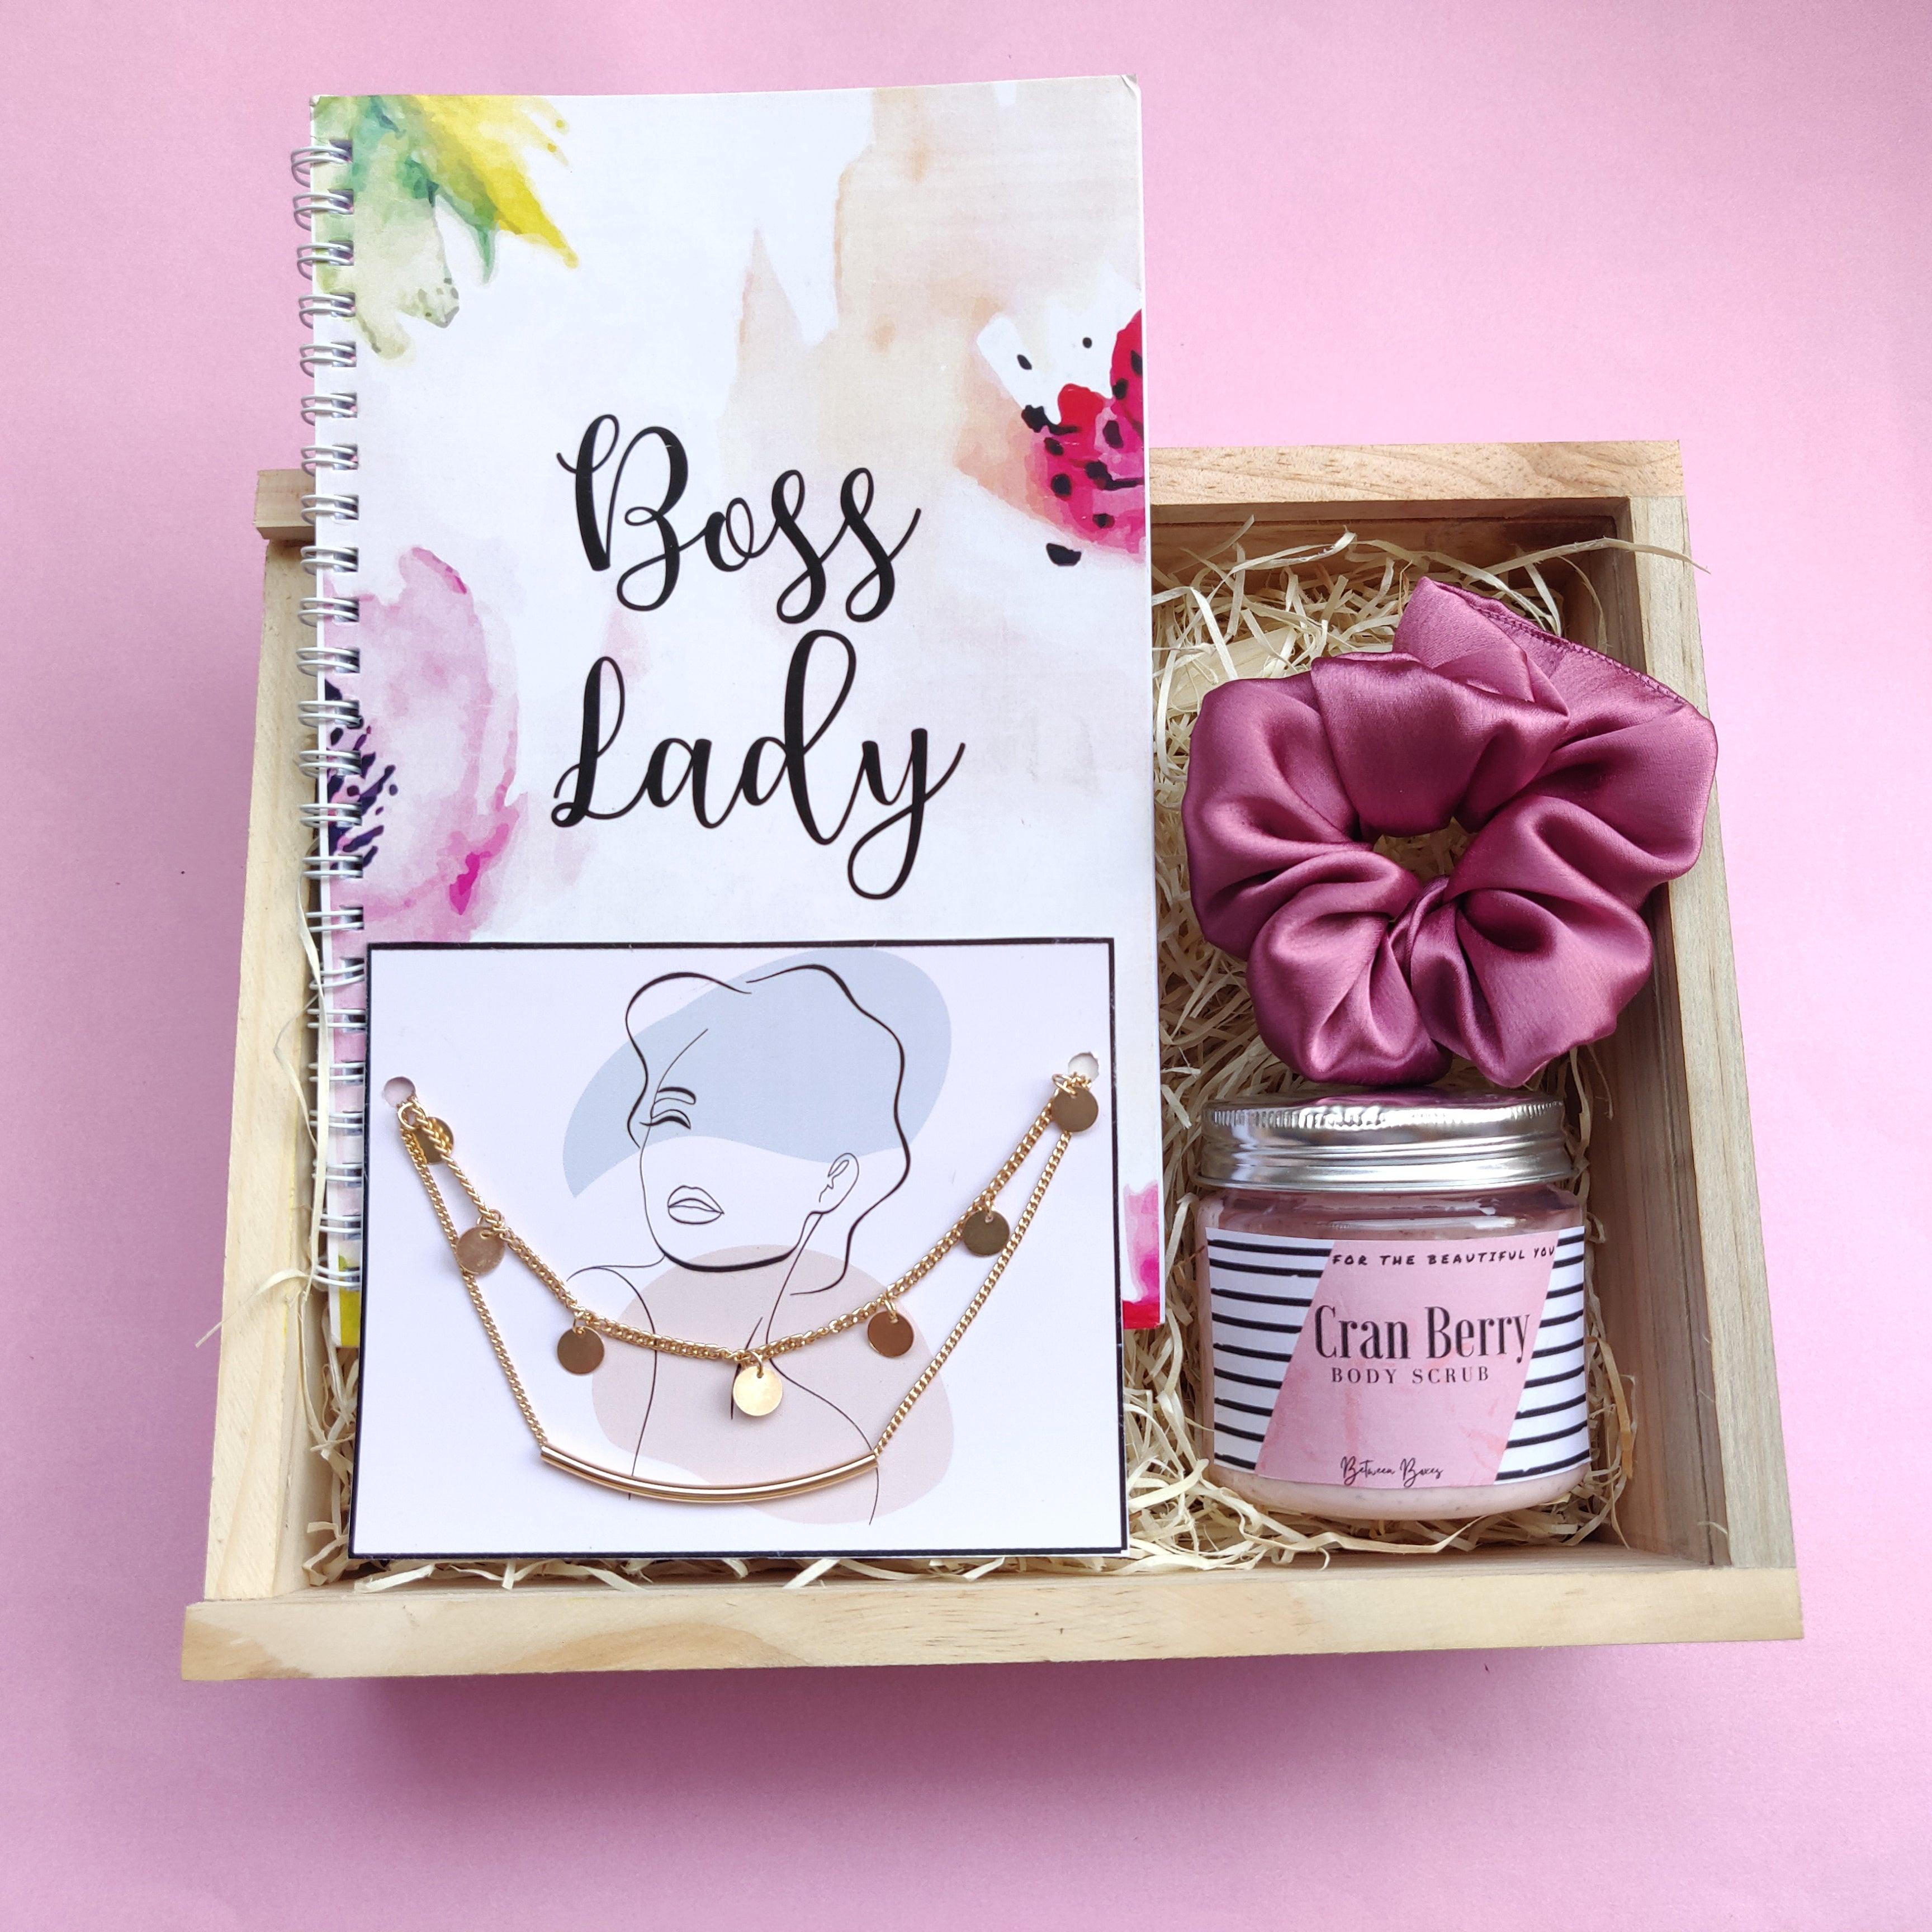 Buy Birthday Gifts for Women - Funny Relaxing & Spa Gift Set Box Basket for  Her Girlfriend Mom Daughter Sister Coworker, Personalized Unique Best Happy  Birthday Gift Boxes Idea for Women Online